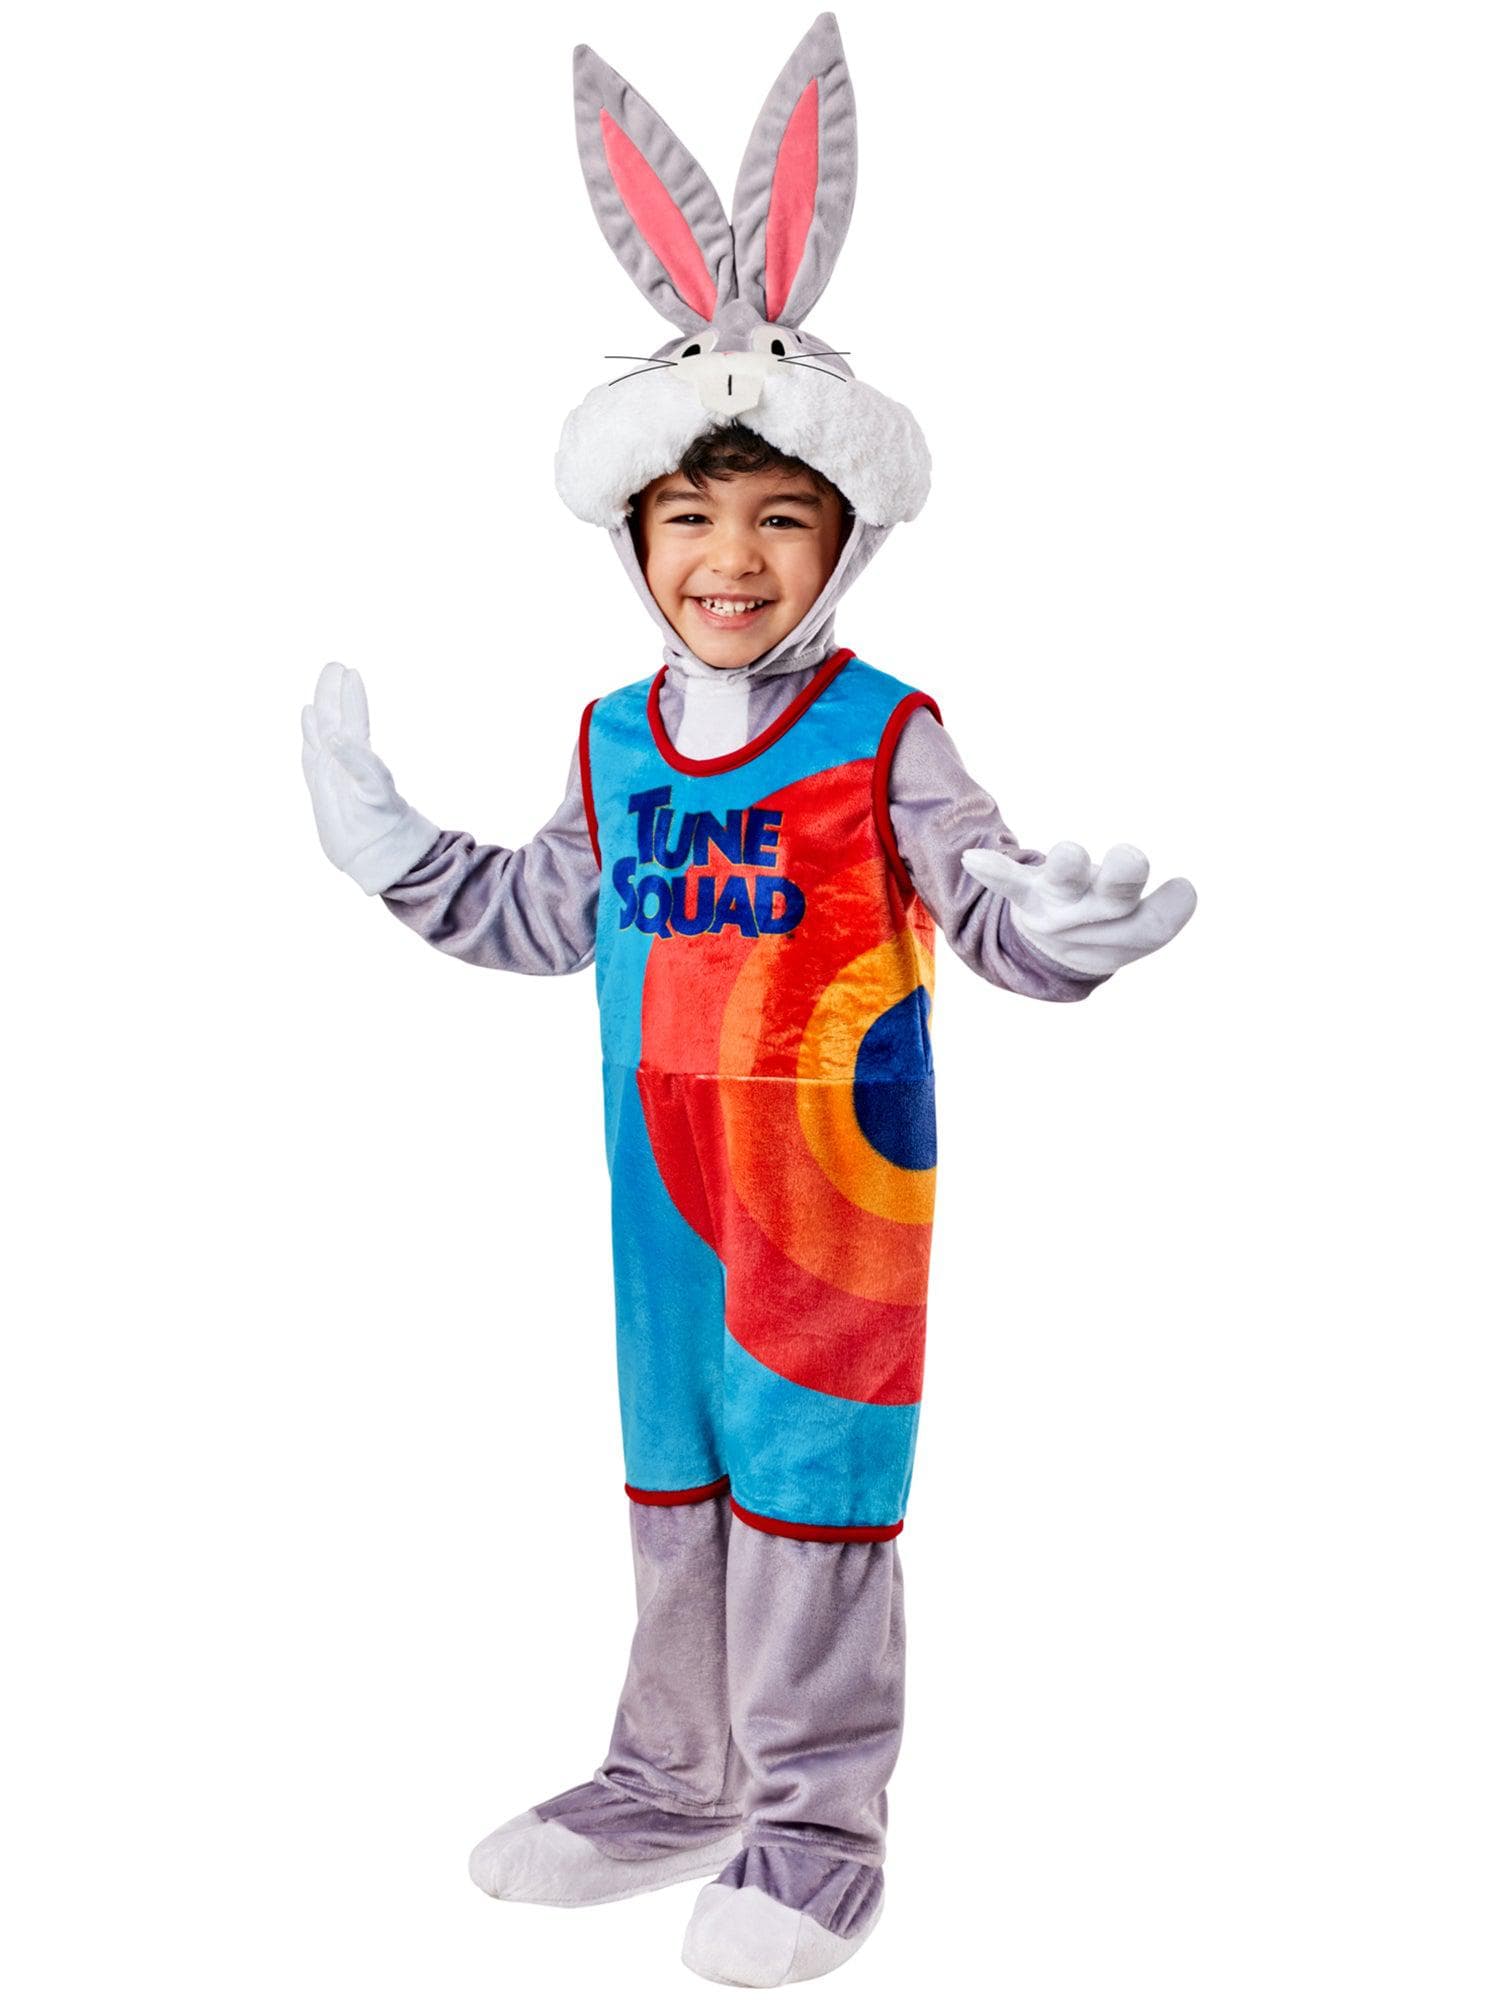 Space Jam: A New Legacy Bugs Bunny Costume for Babies and Toddlers - costumes.com